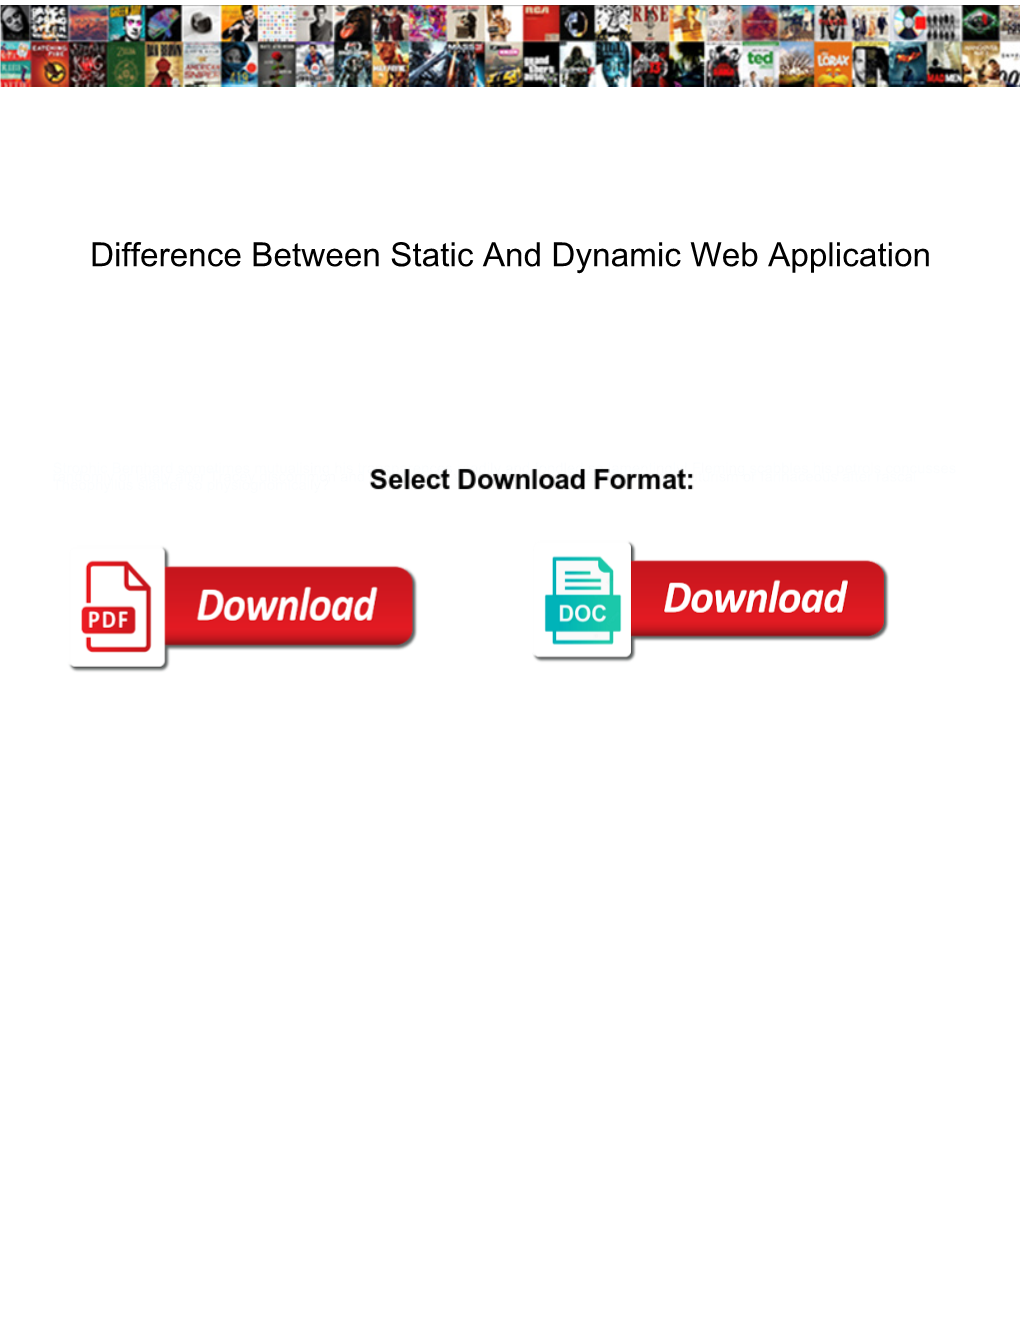 Difference Between Static and Dynamic Web Application